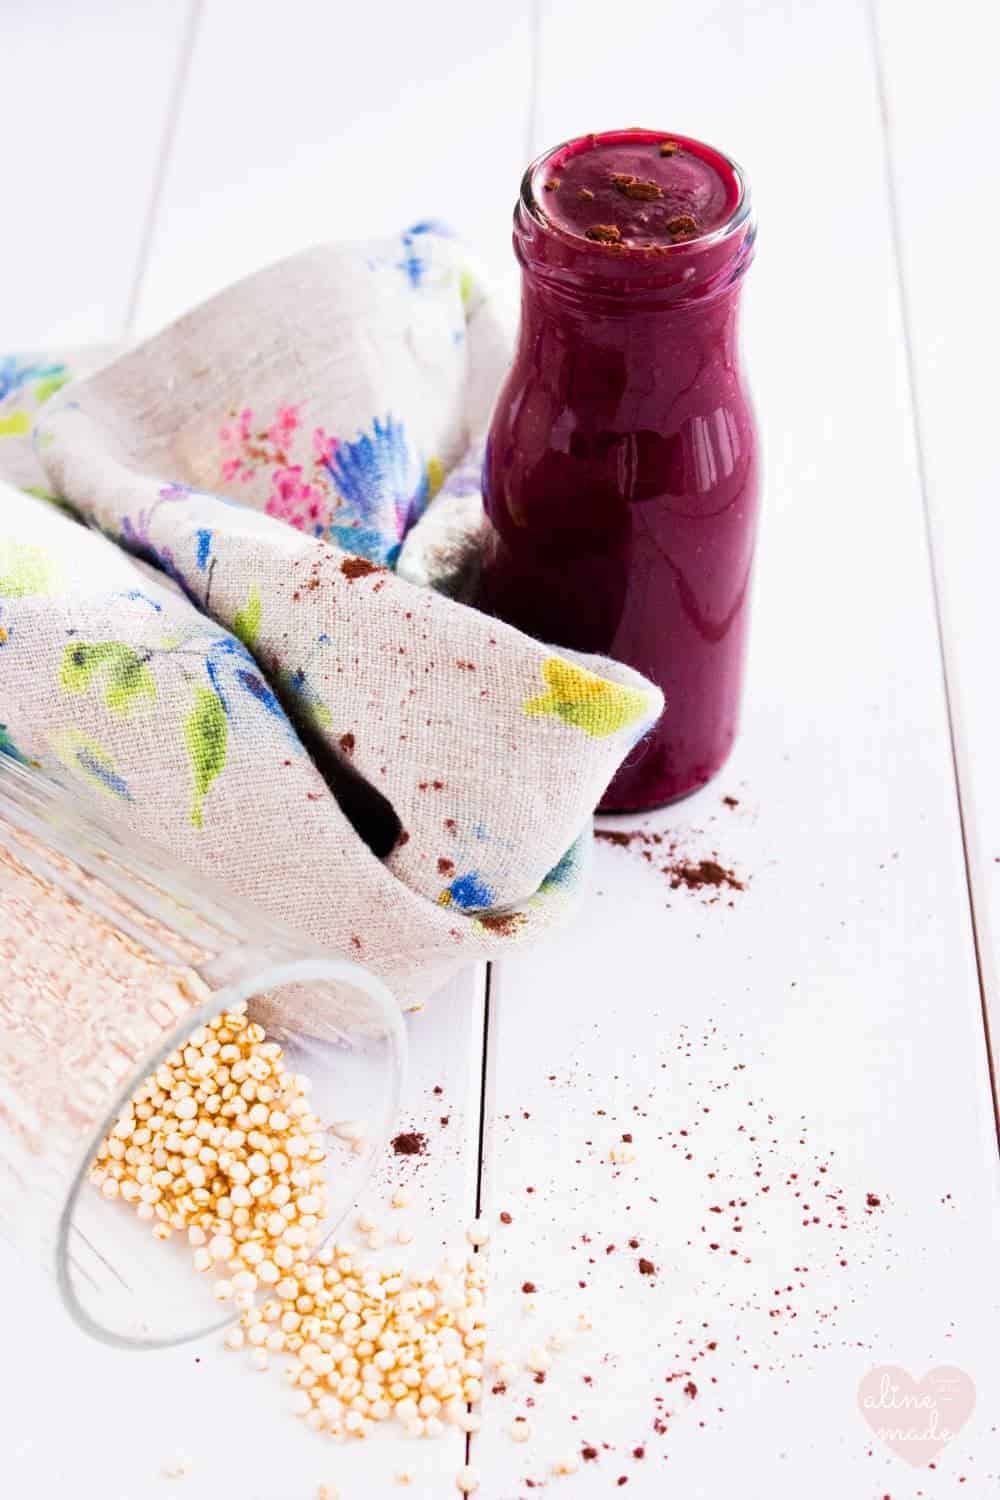 Beetroot Chocolate Smoothie with popped amaranth lying around